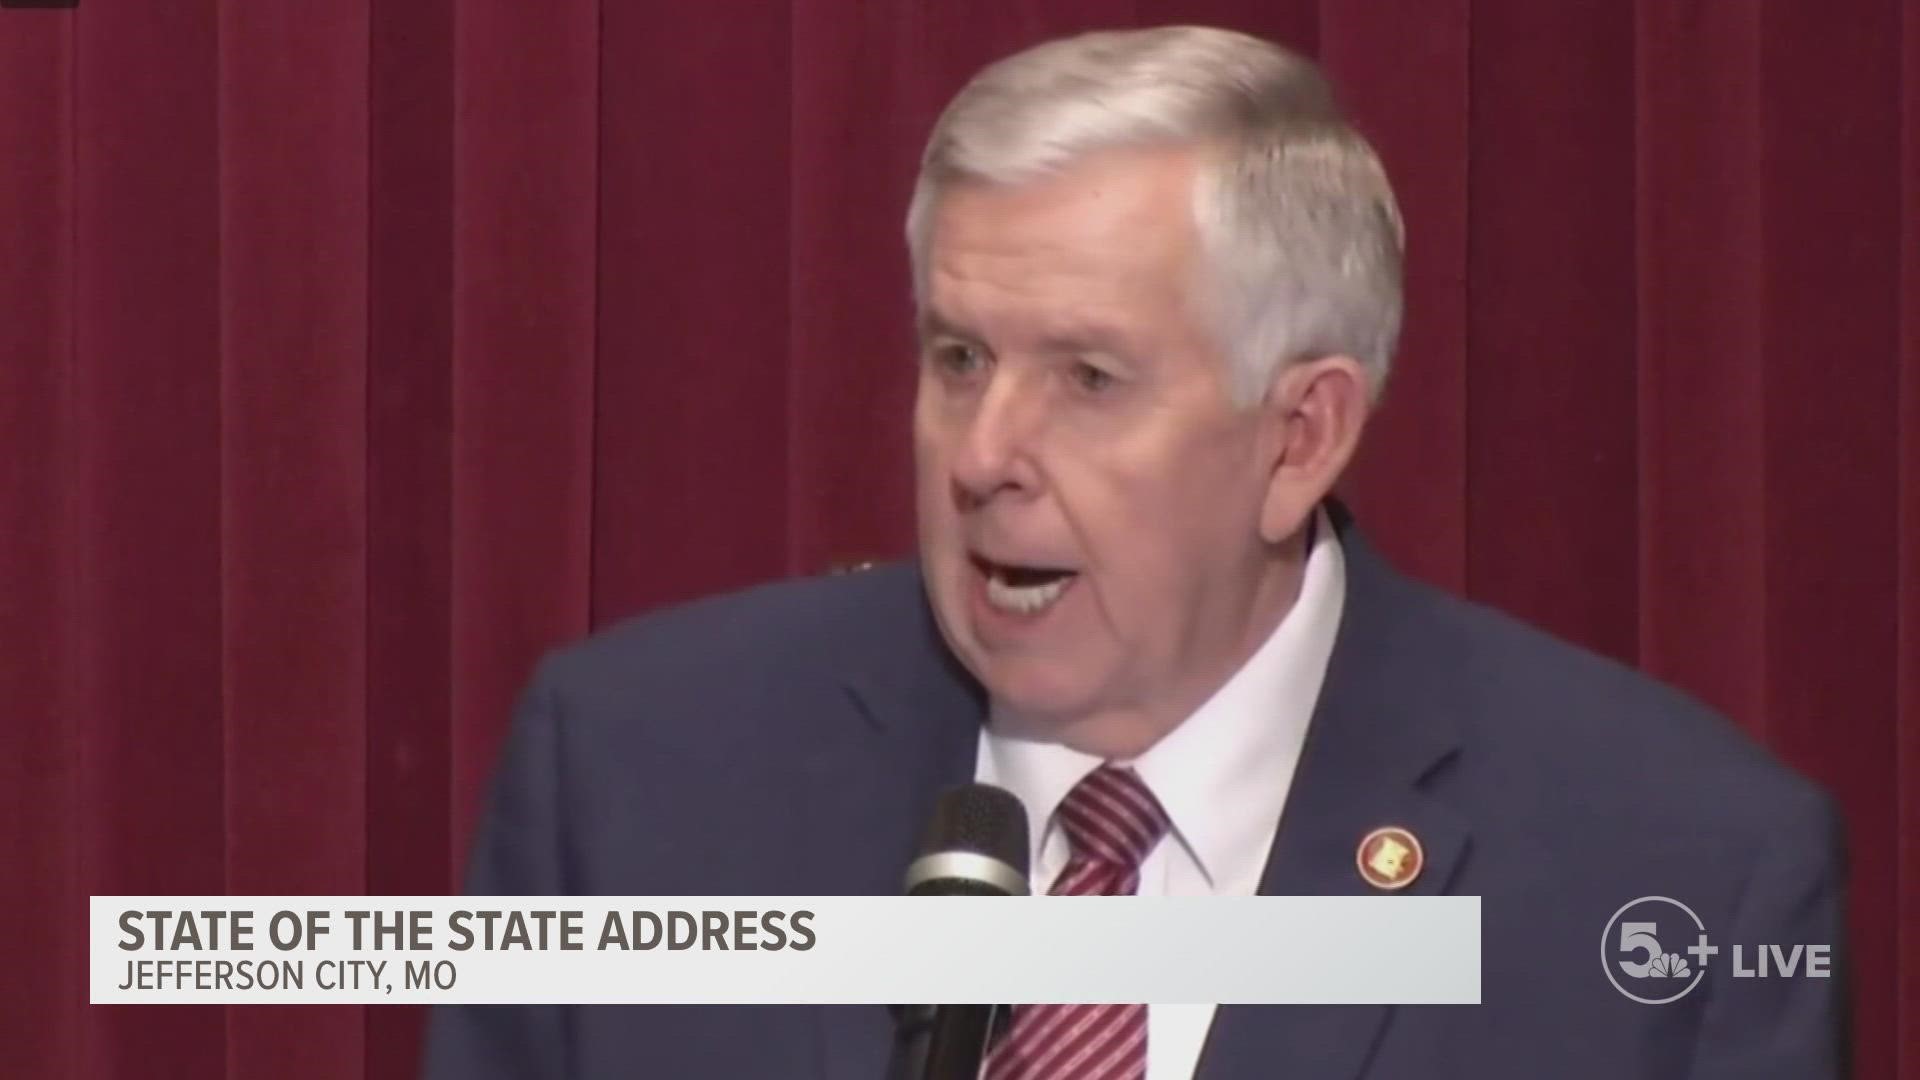 Gov. Mike Parson addressed Missouri on the state budget and important updates from the state. The address was Jan. 18, 2023.